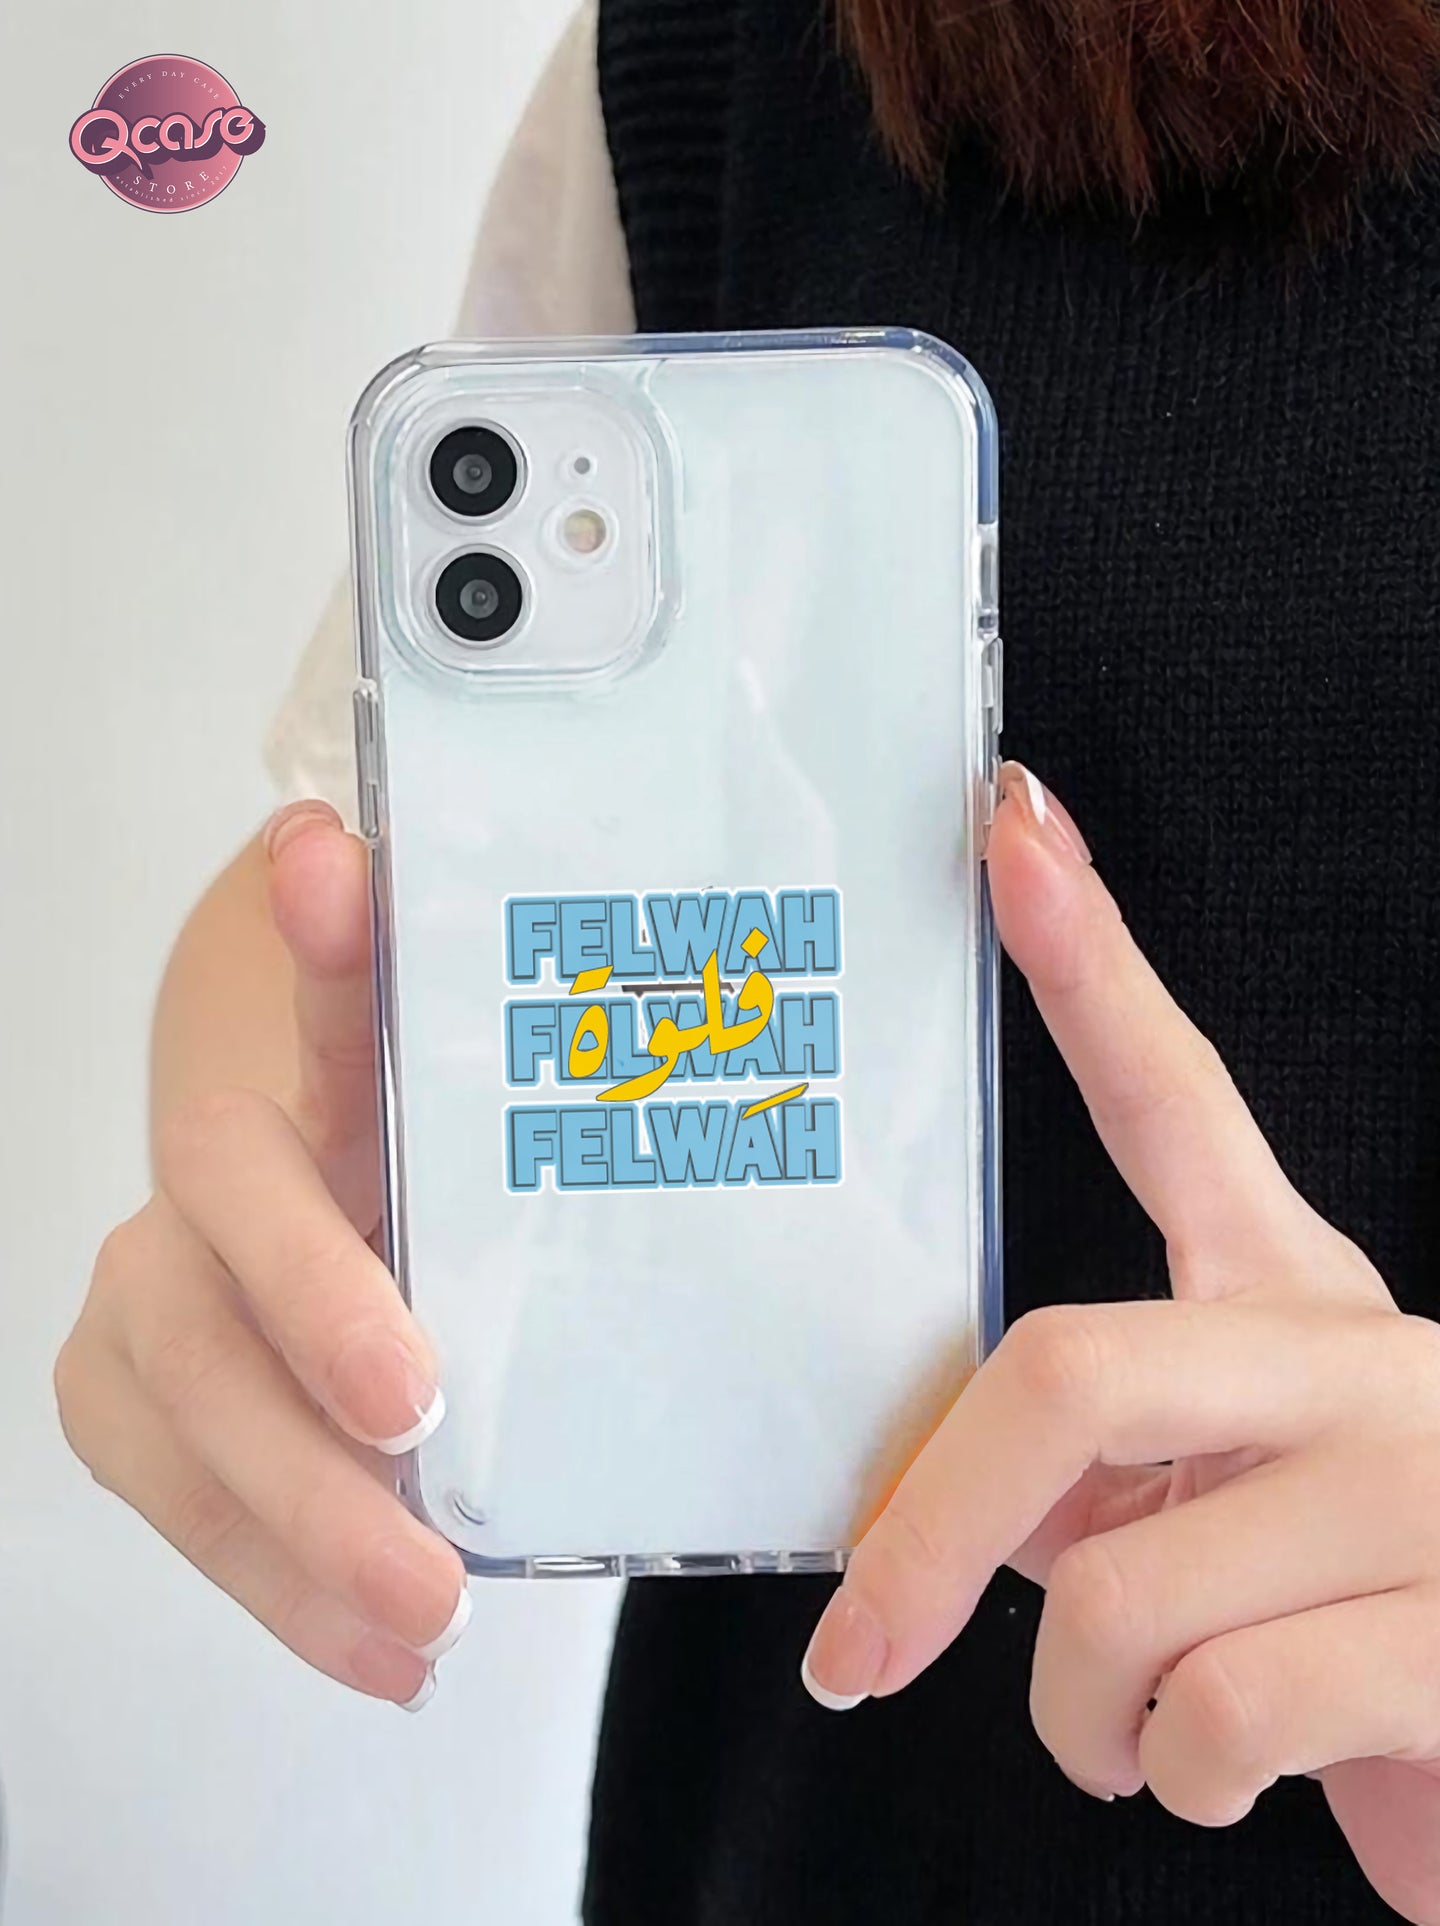 Phone cover with special names